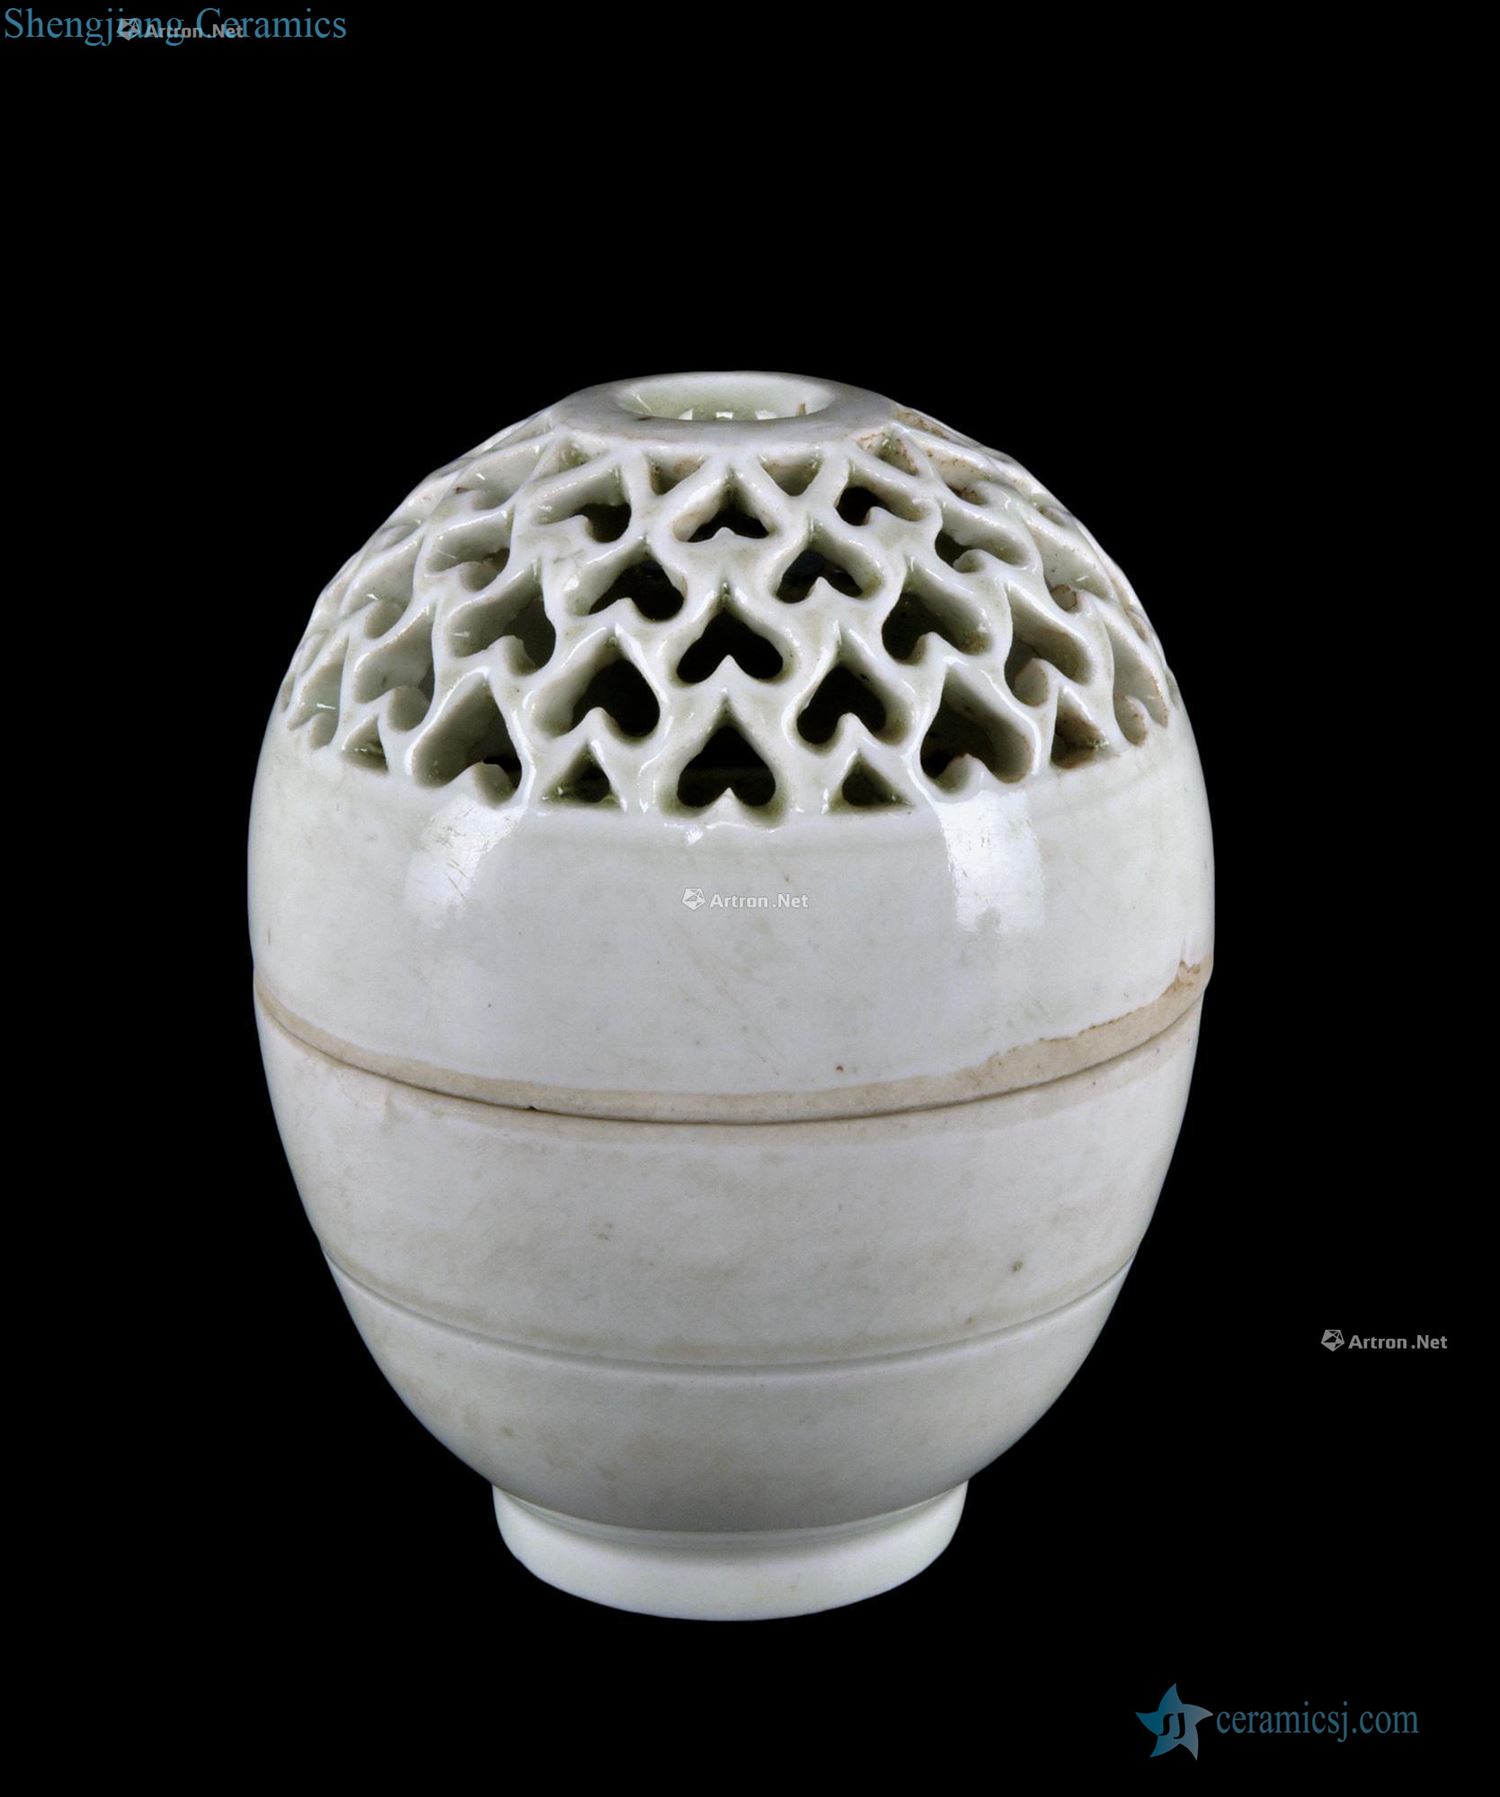 The southern song dynasty Left kiln green white glazed hollow out cover